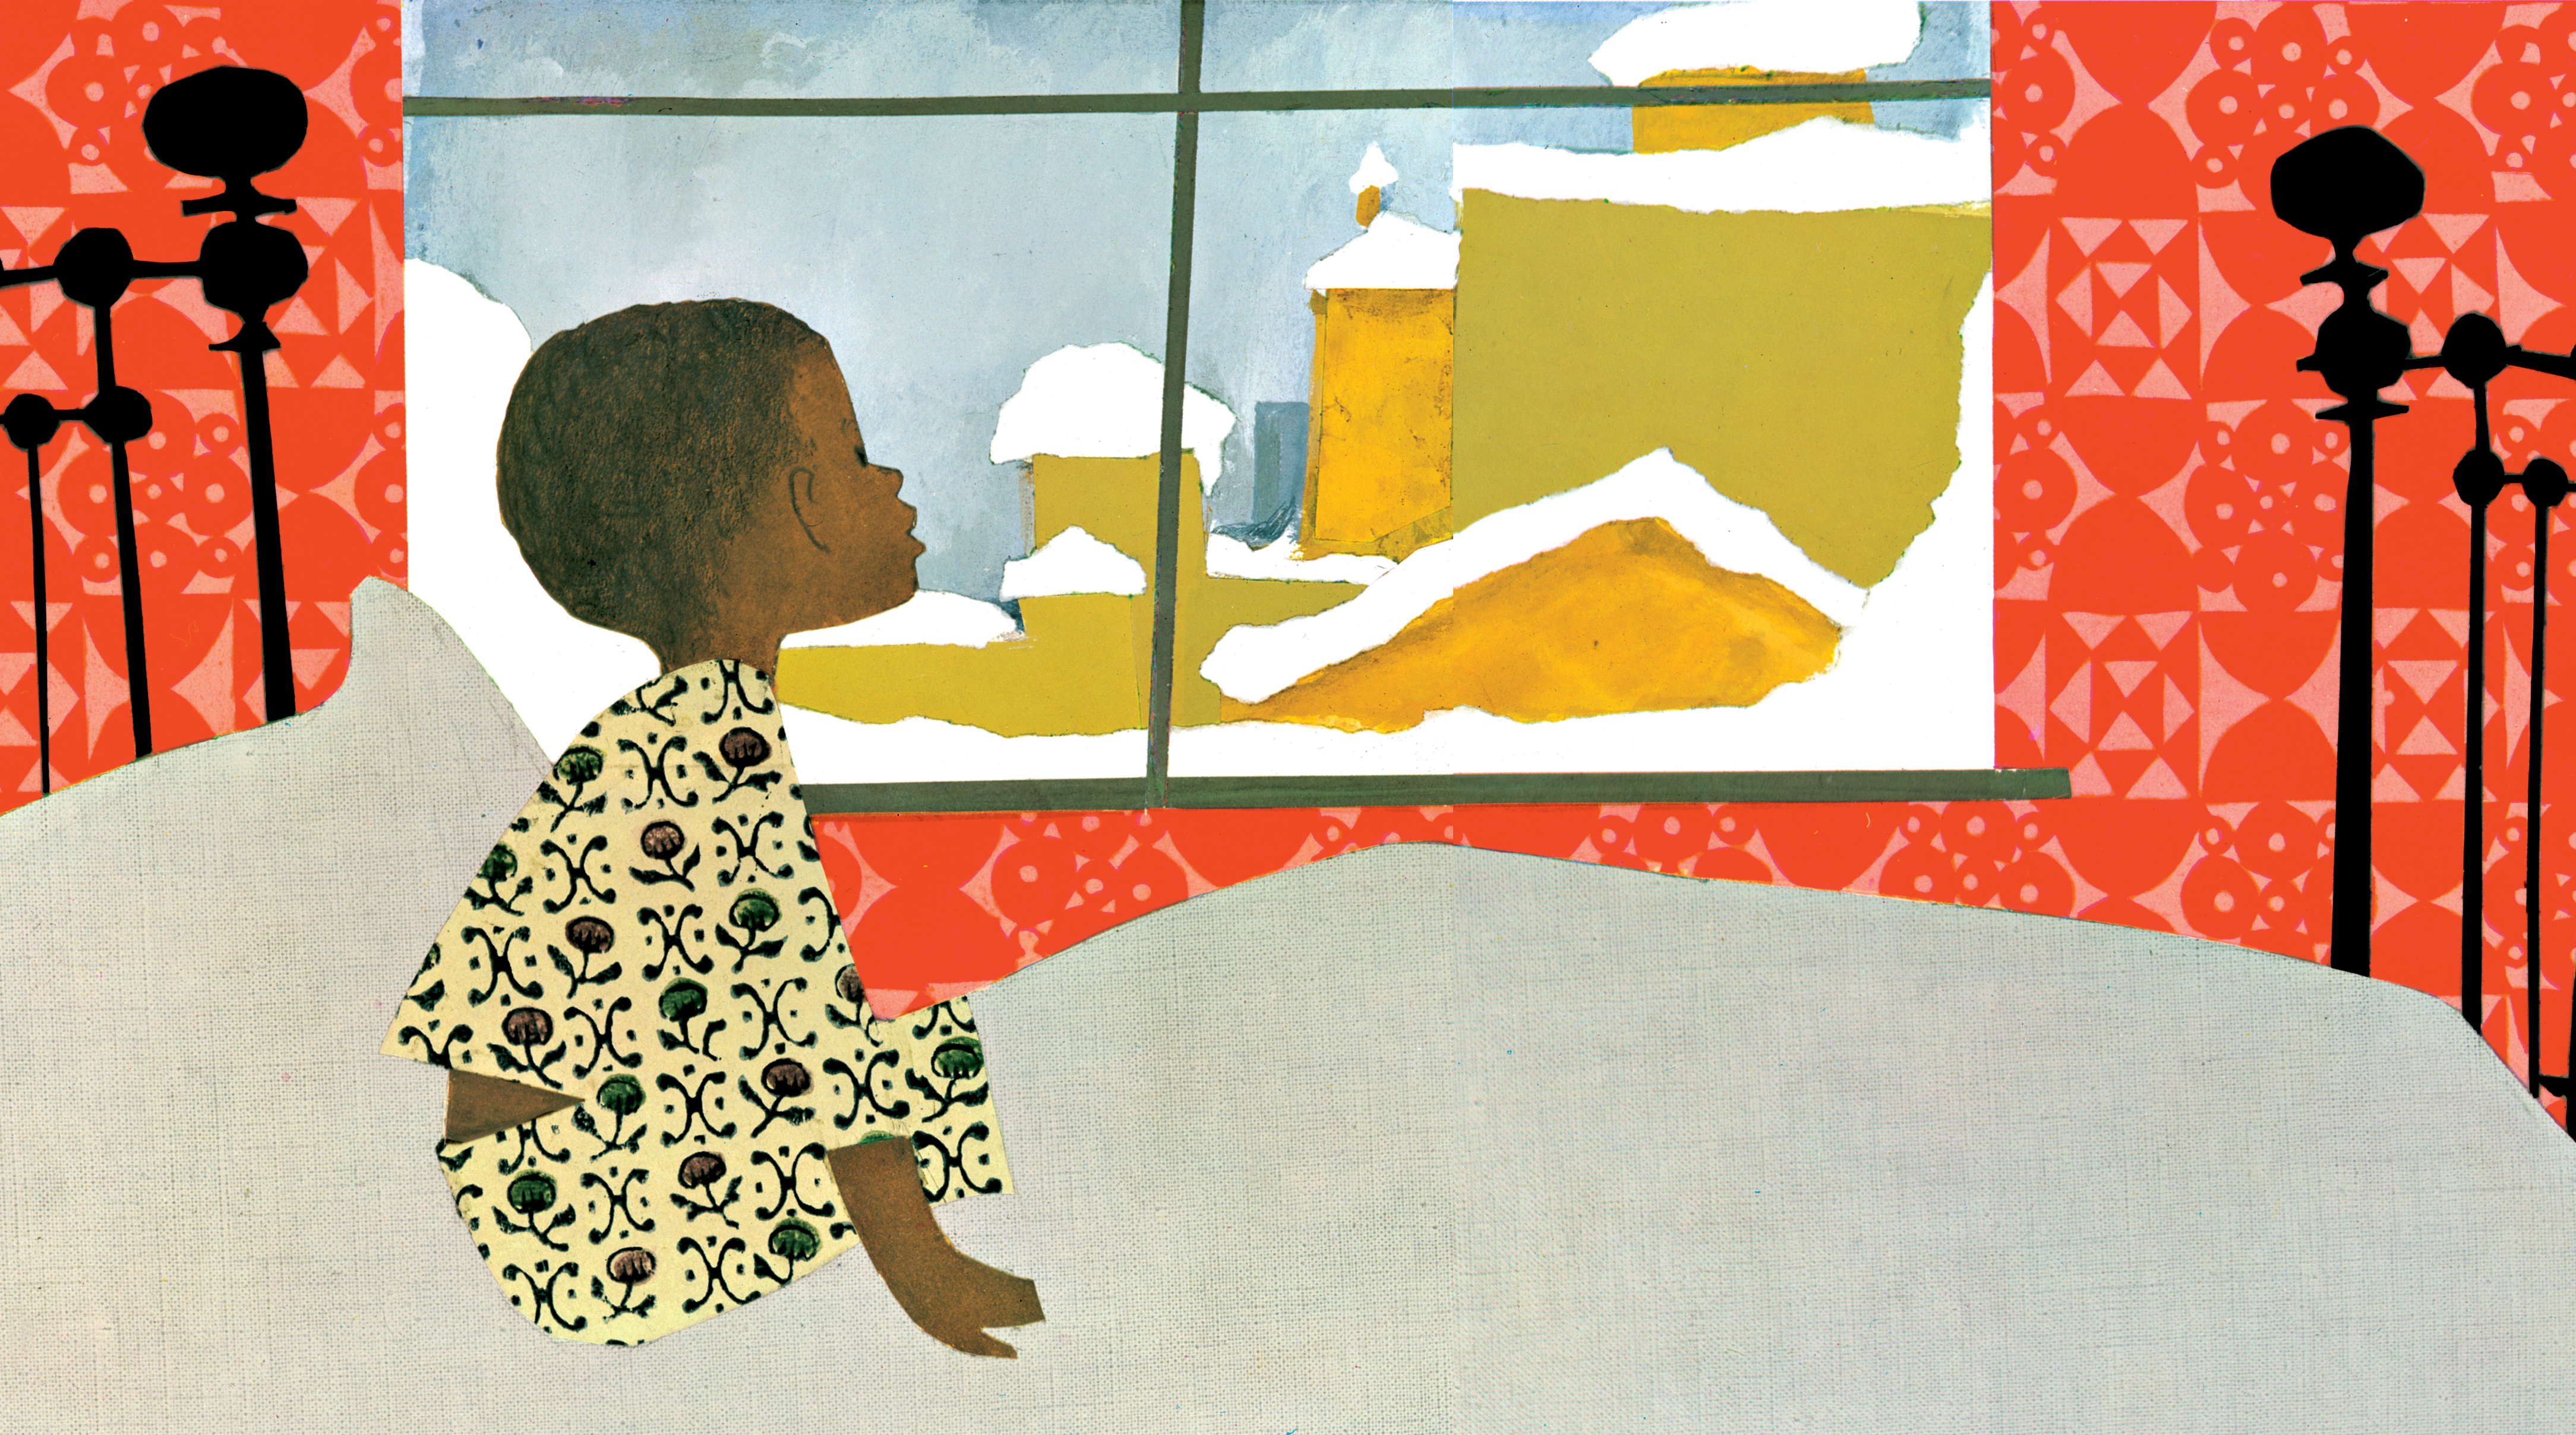 How Beloved Children's Book “The Snowy Day” Became an Enduring ...